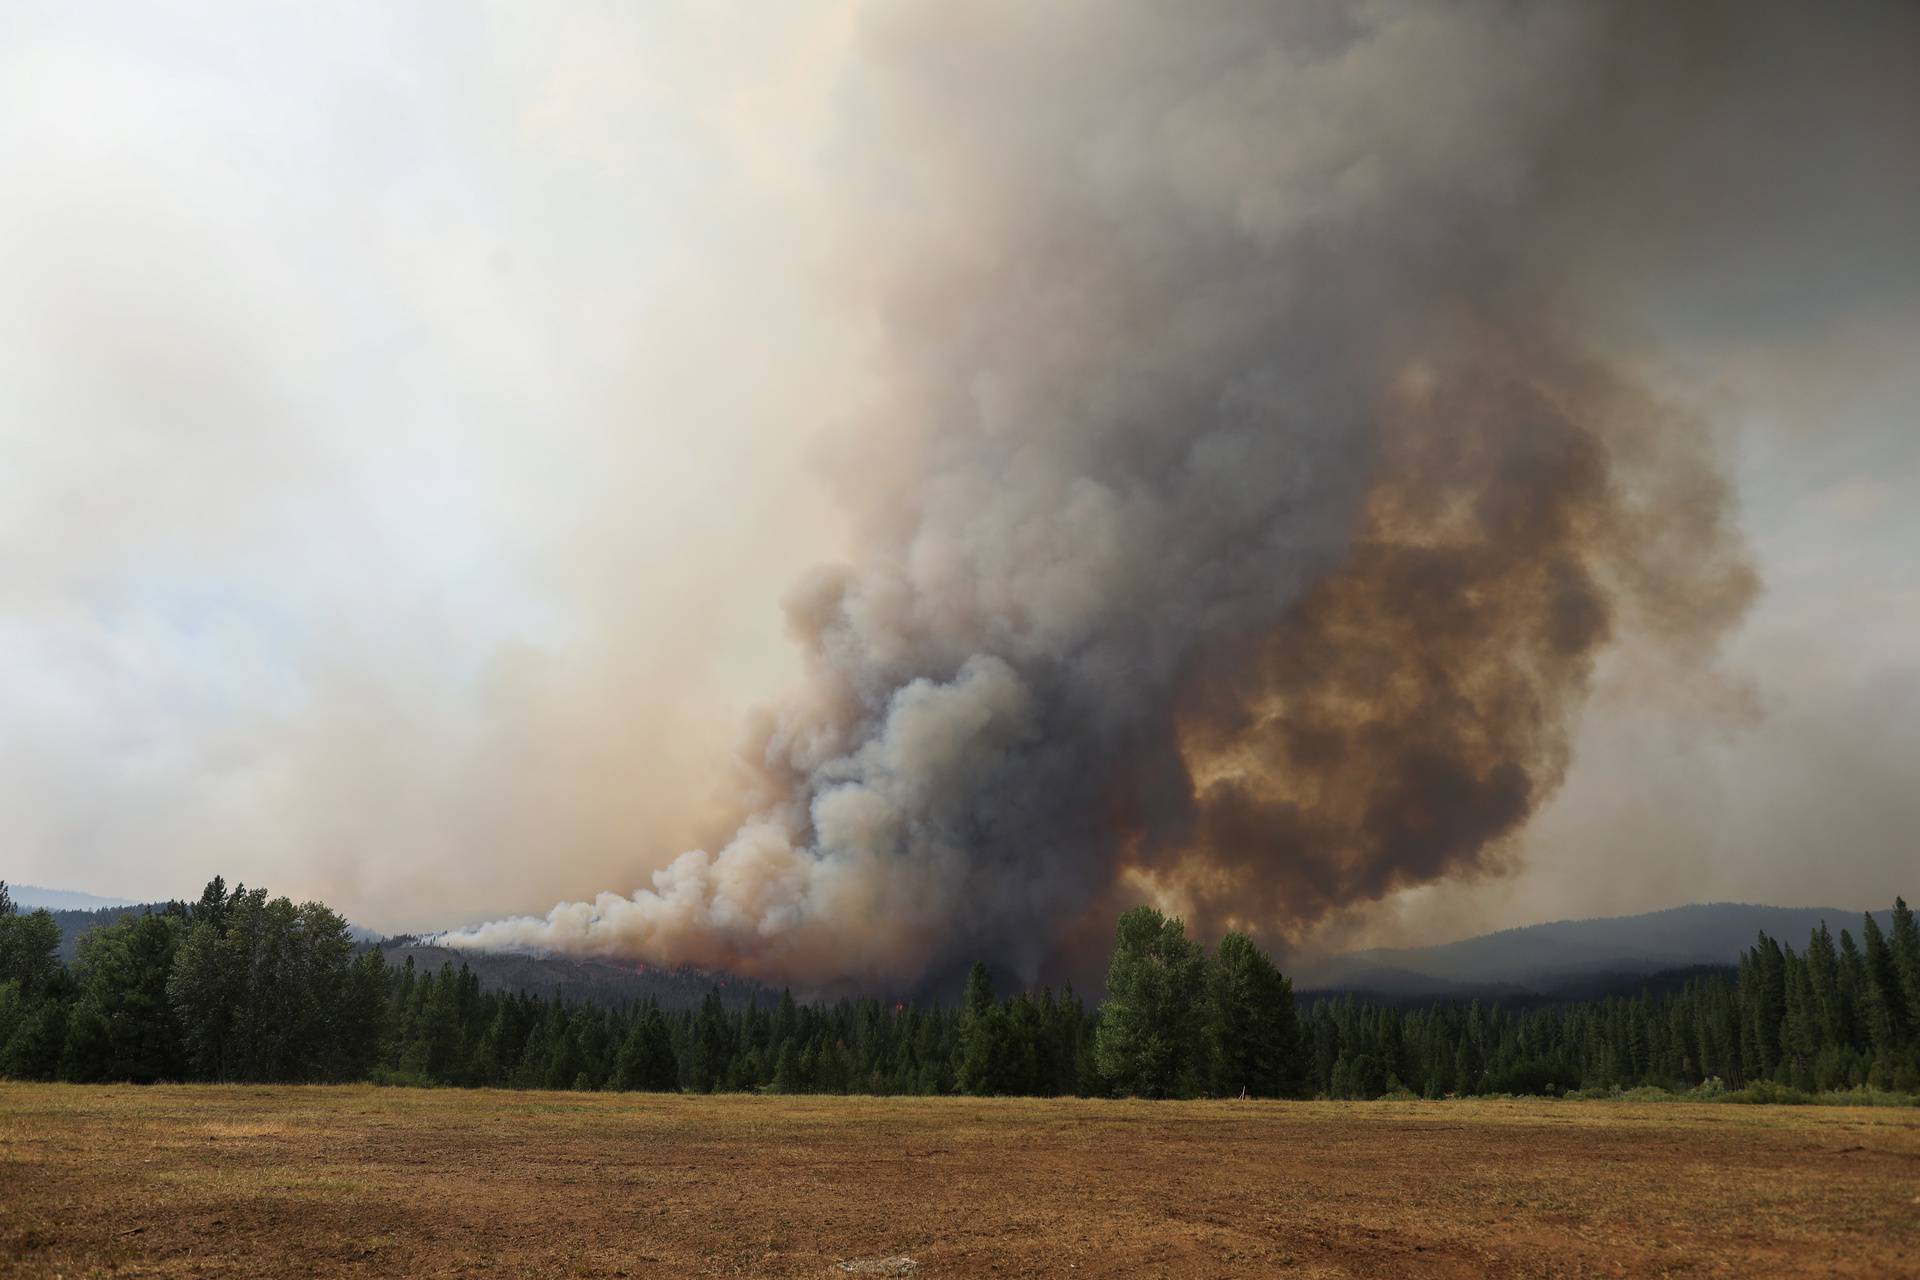 Dixie Fire is California's largest active fire